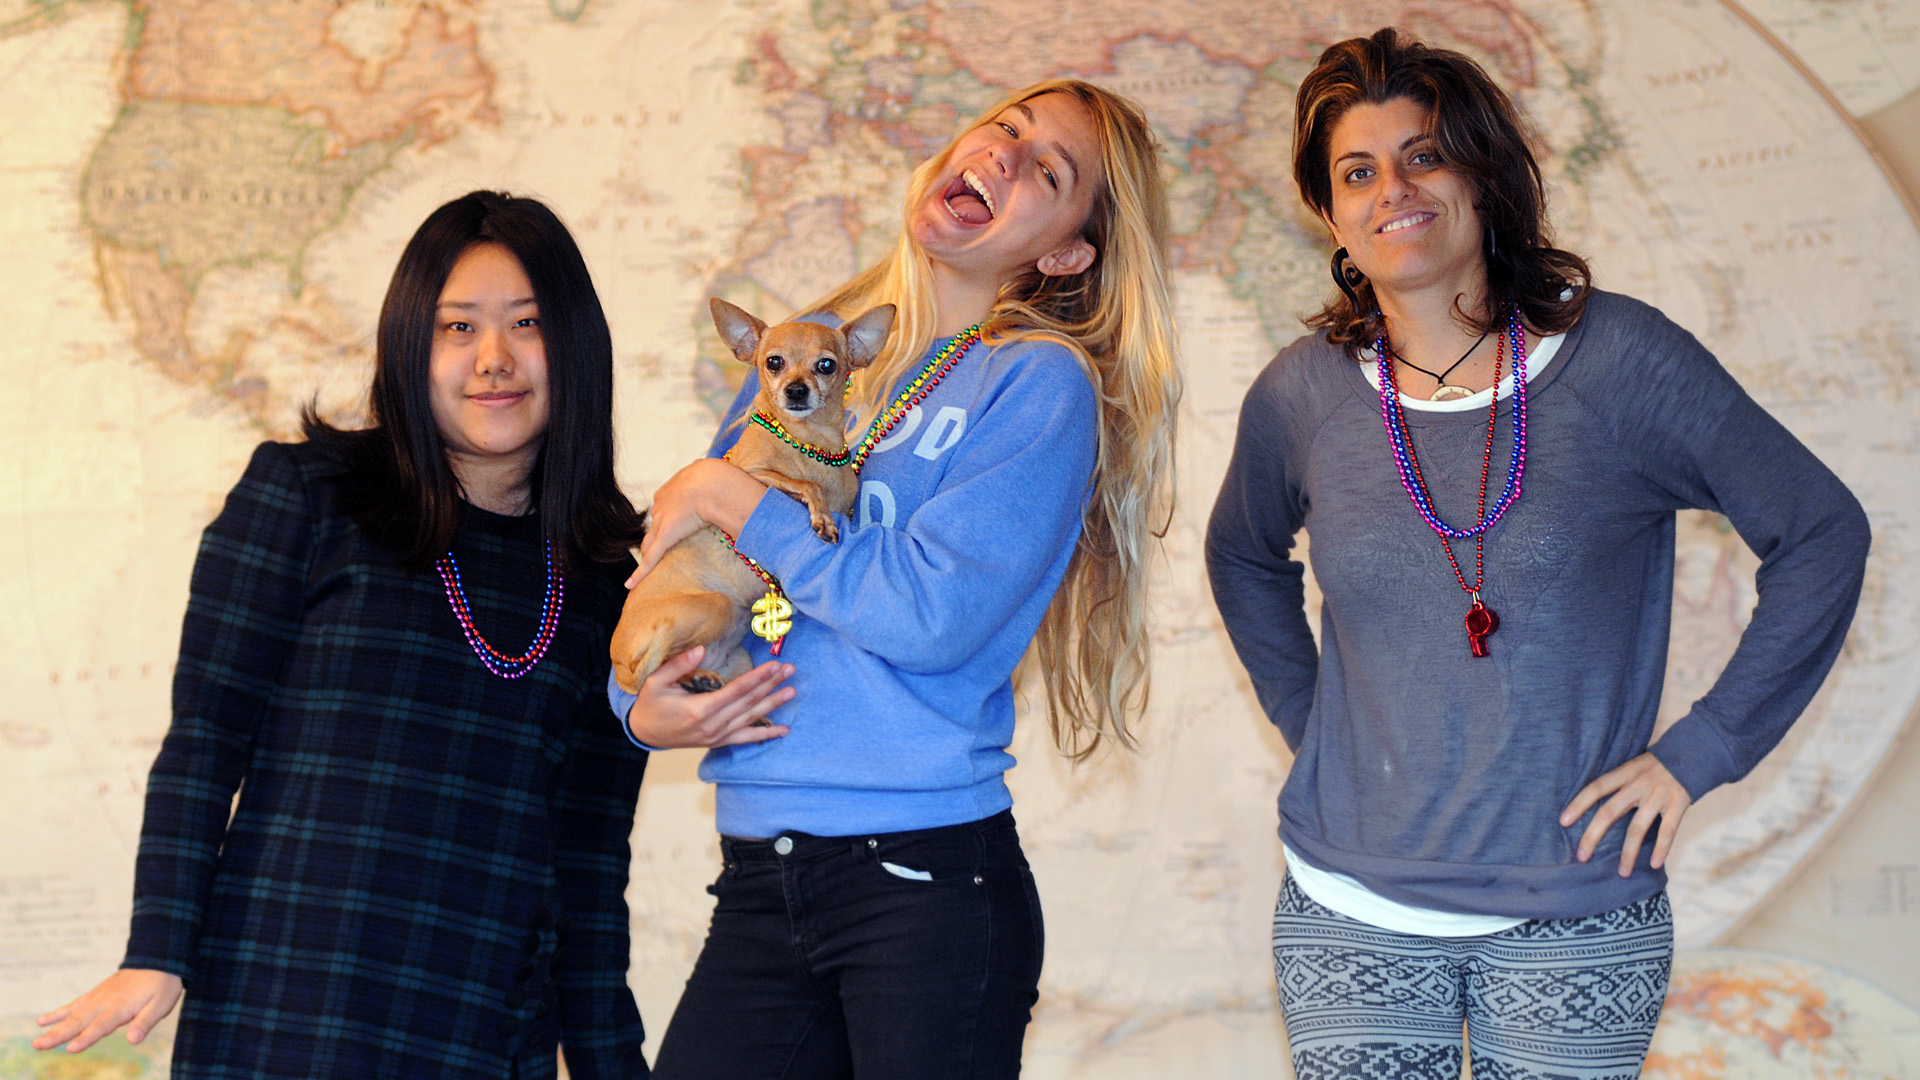 Blaire, Tiki, Dasha & Silvana in front of a large world map. They're all wearing "bling" like Mardi Gras beads